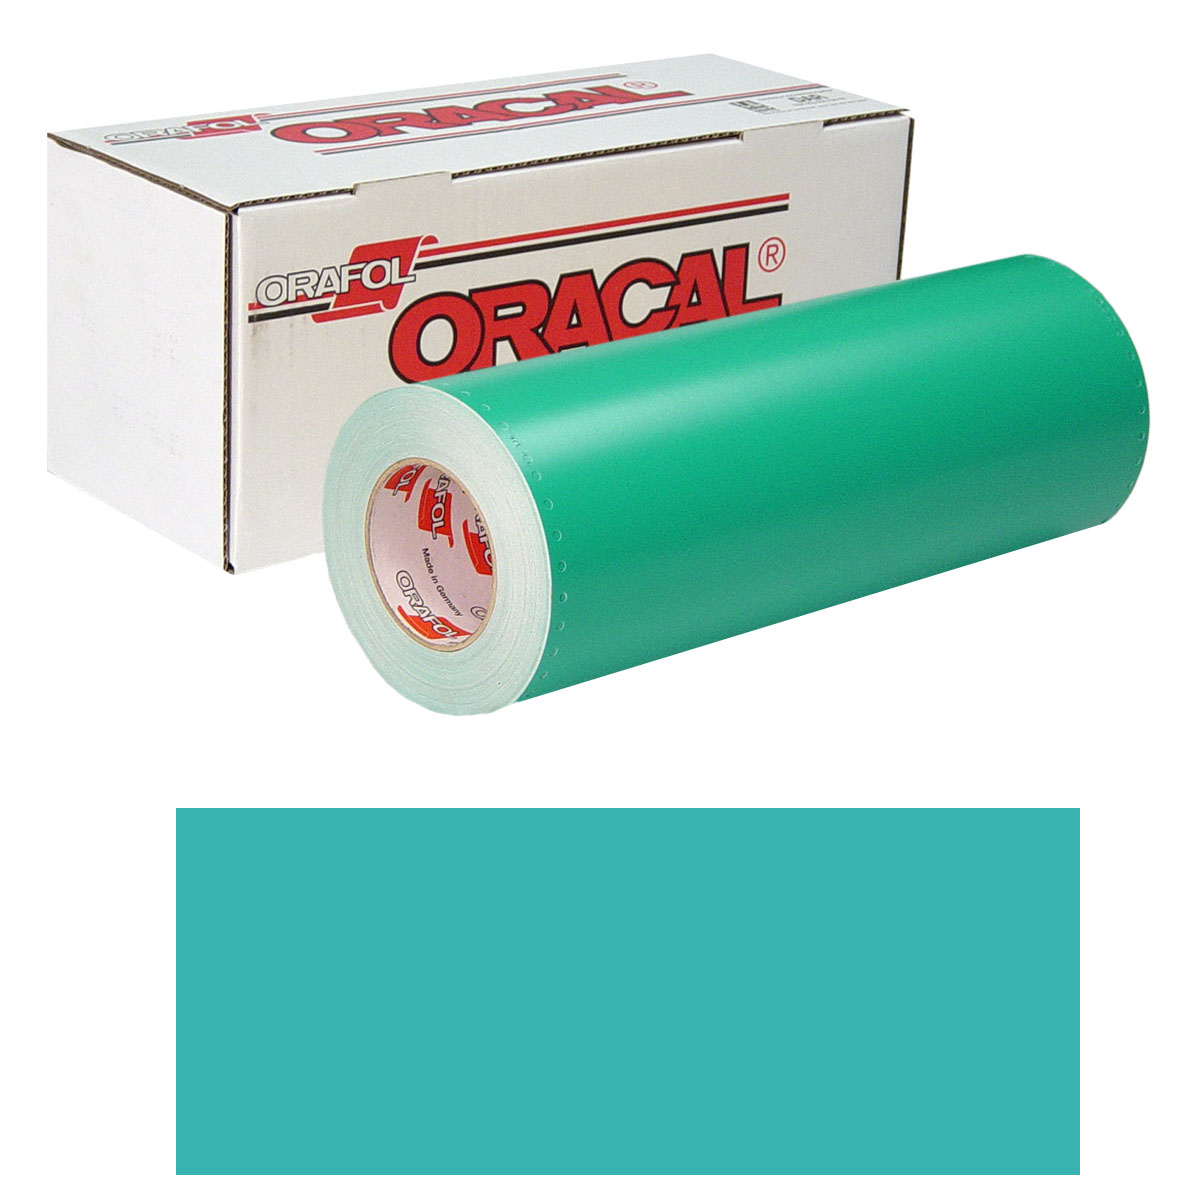 ORACAL 8500 Unp 24in X 50yd 054 Turquoise